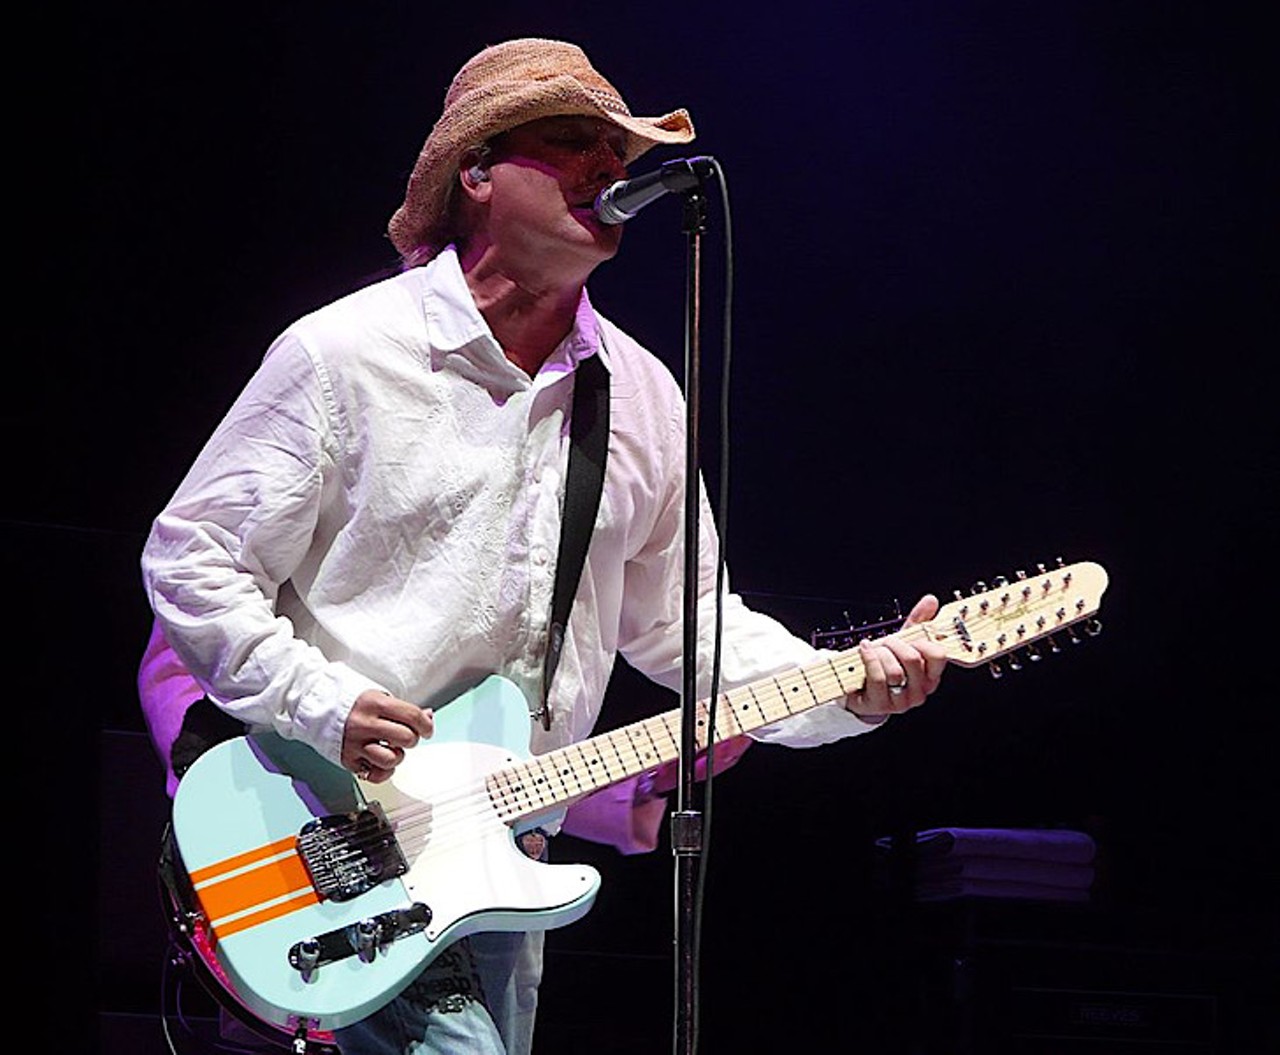 Robin Zander
The lead singer and guitarist of the band Cheap Trick, Robin Zander, is currently a resident of Safety Harbor. Zander was inducted into the Rock and Roll Hall of Fame in 2016 with the other members of Cheap Trick. 
Photo by Matt Becker via Wikimedia Commons